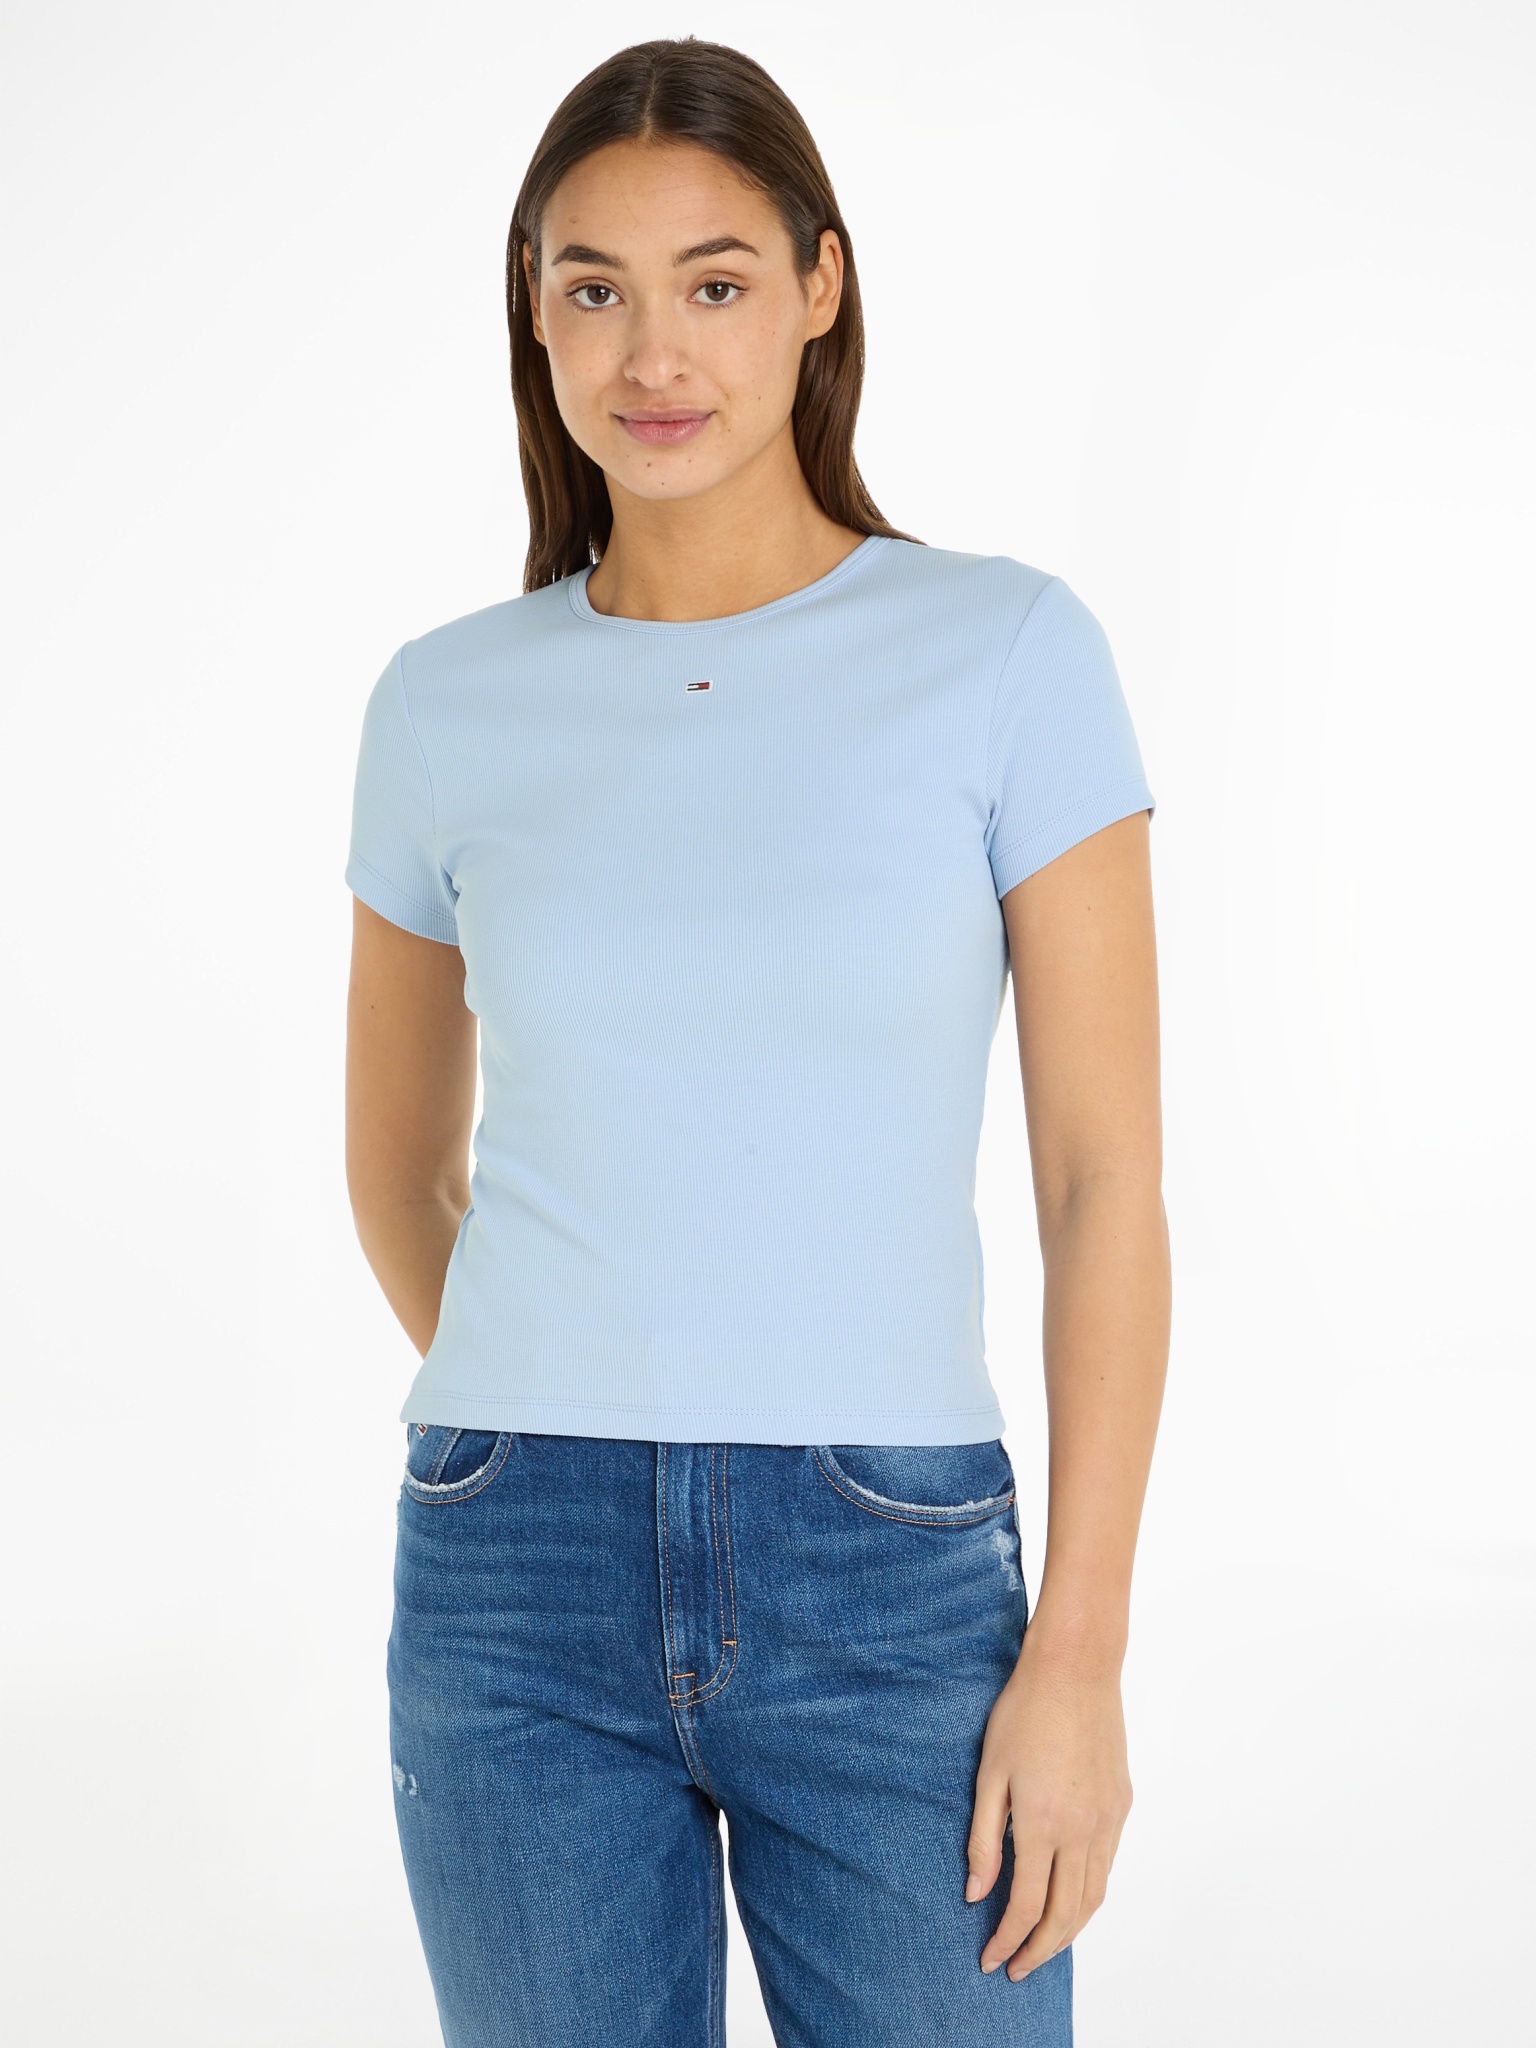 TOMMY JEANS ESSENTIAL FIGURBETONTES RIPPSTRICK-T-SHIRT 10674701